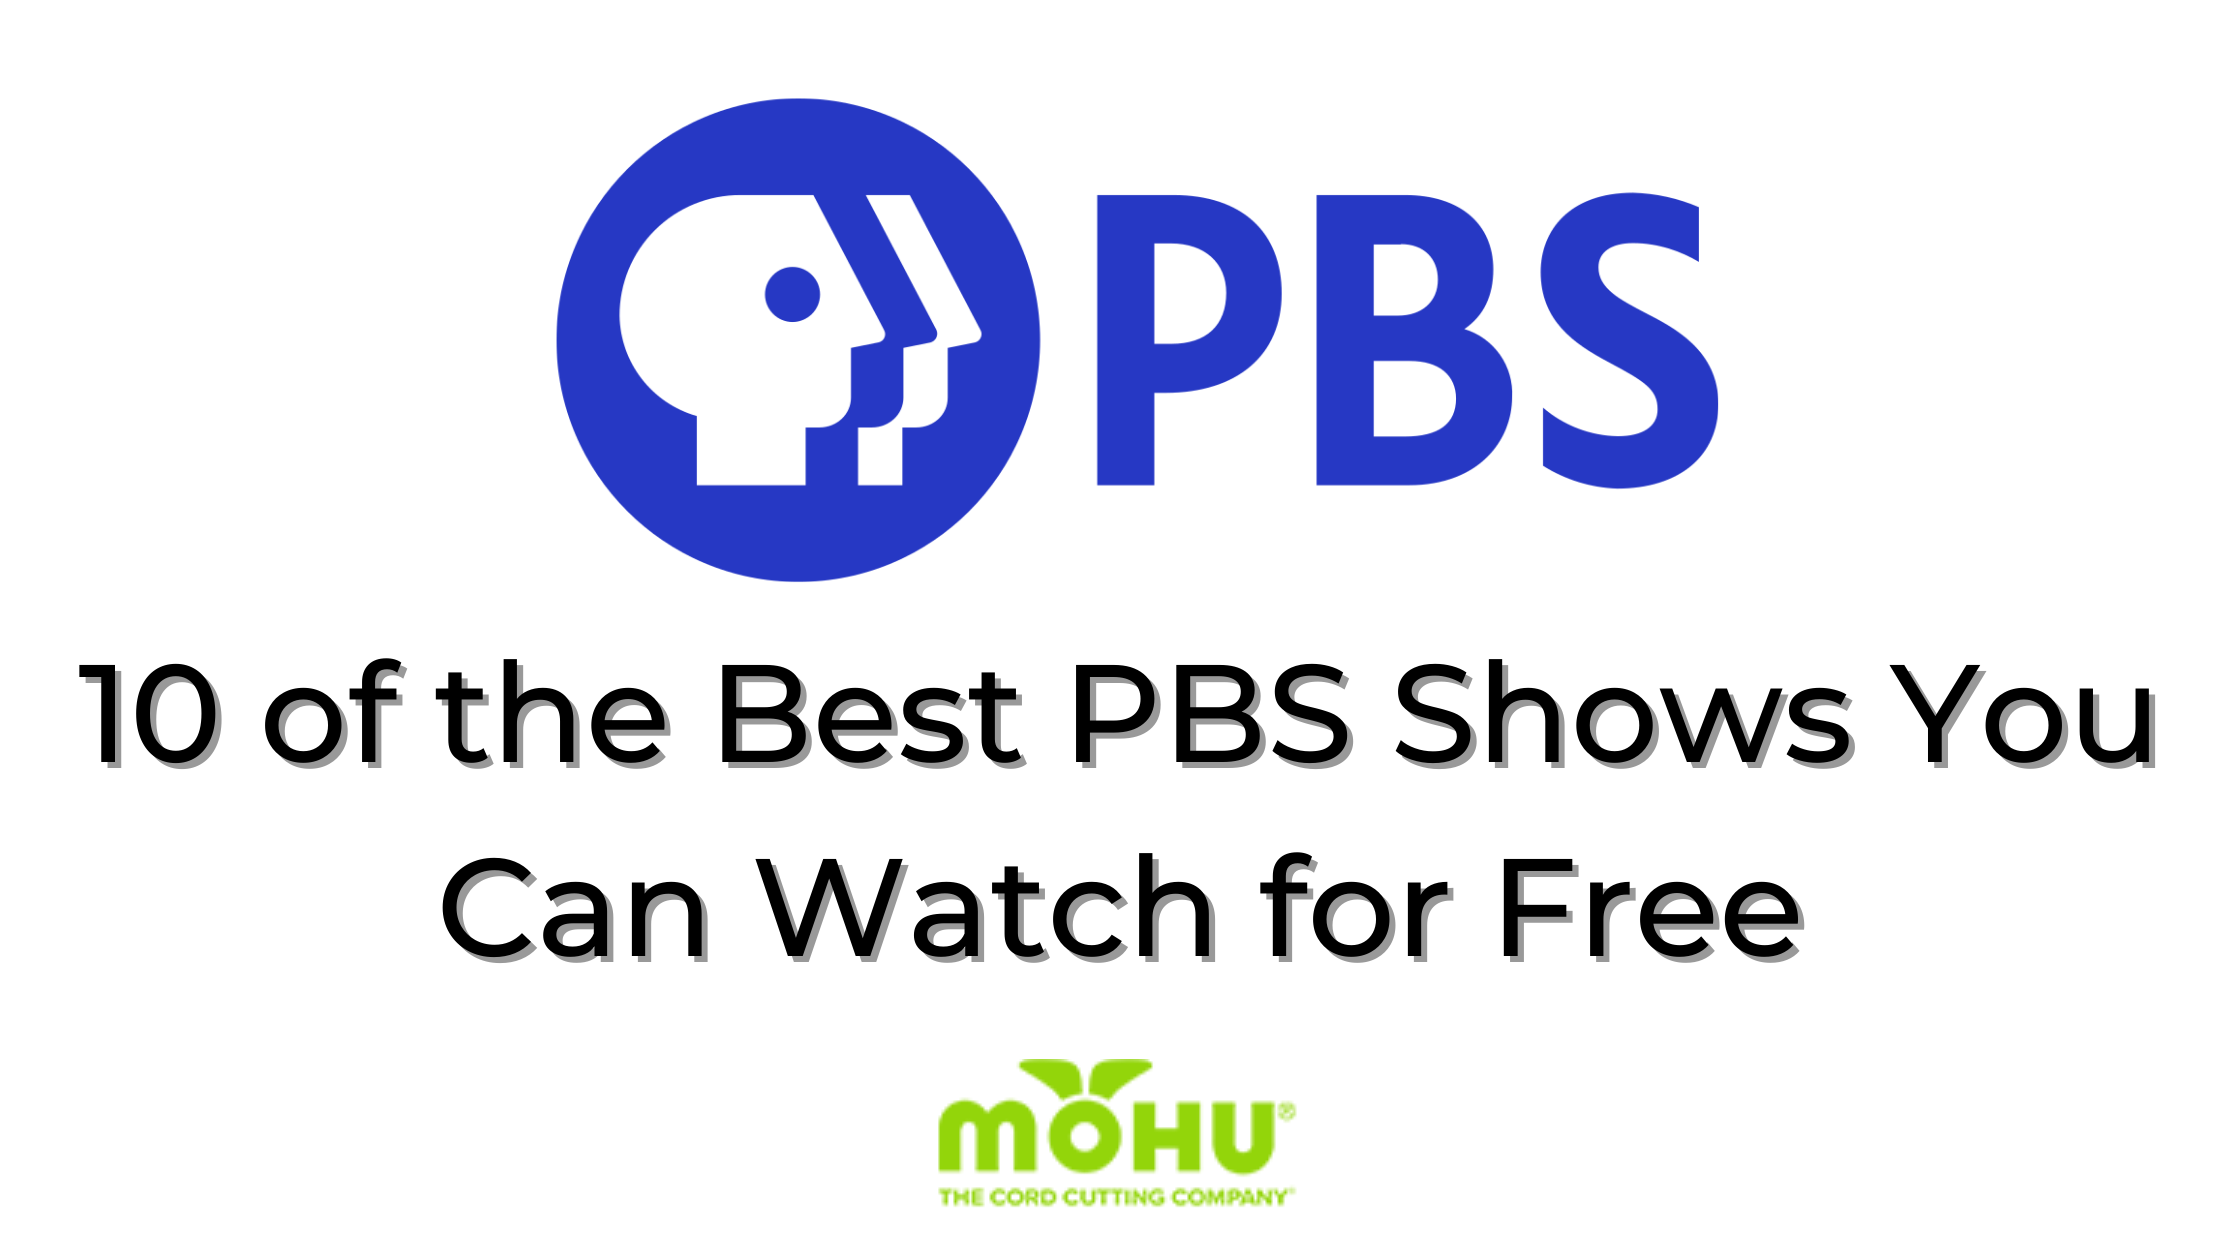 PBS and Mohu logo, 10 of the Best PBS Shows You Can Watch for Free